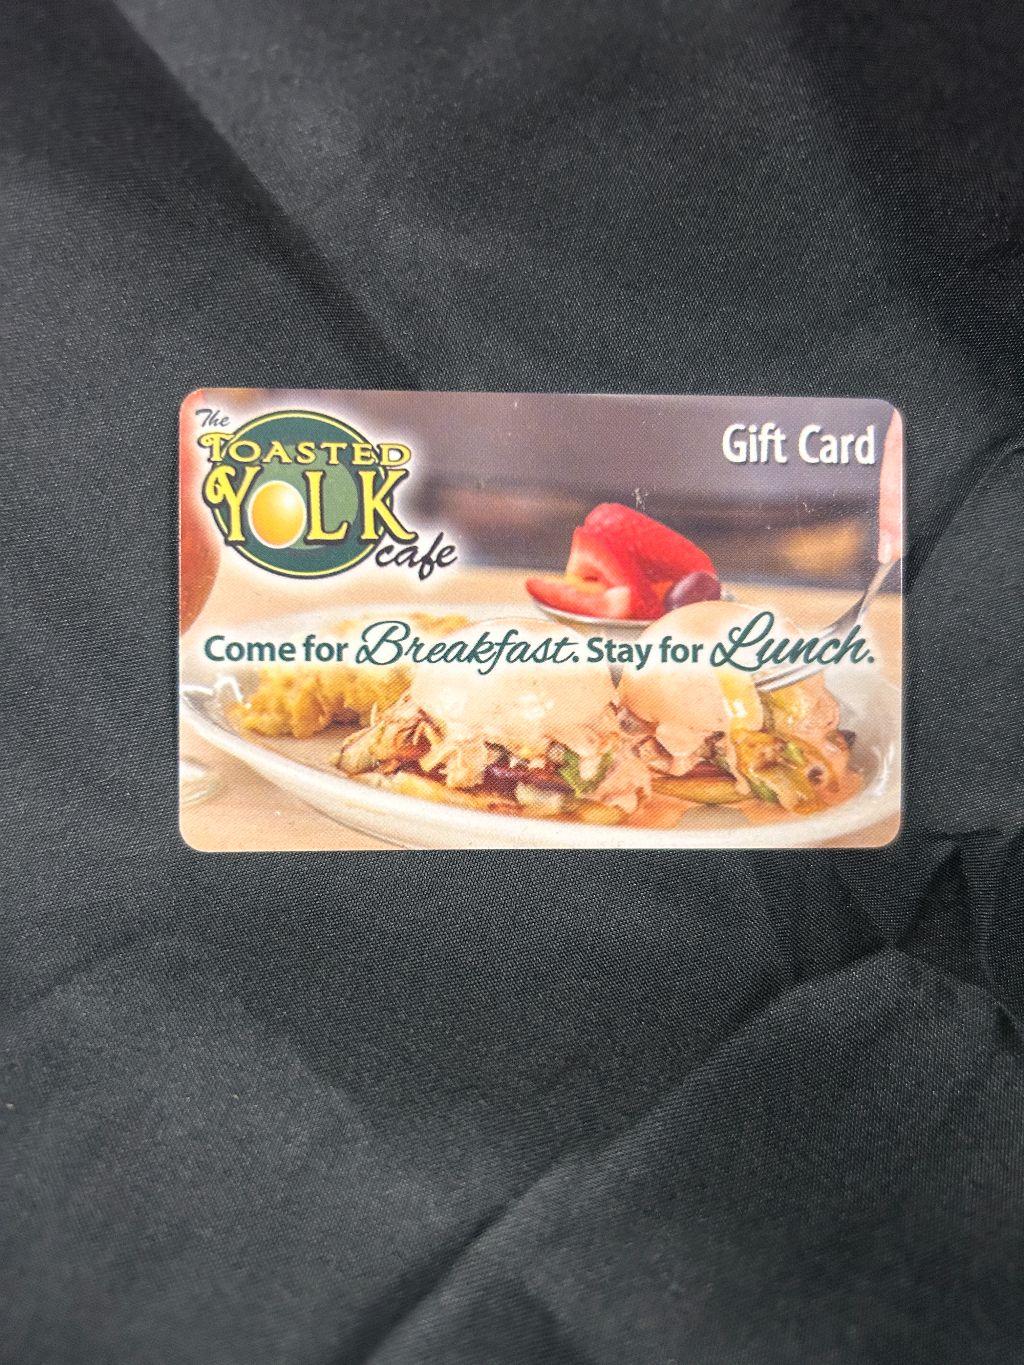 $100 Gift Card to Toasted Yolk